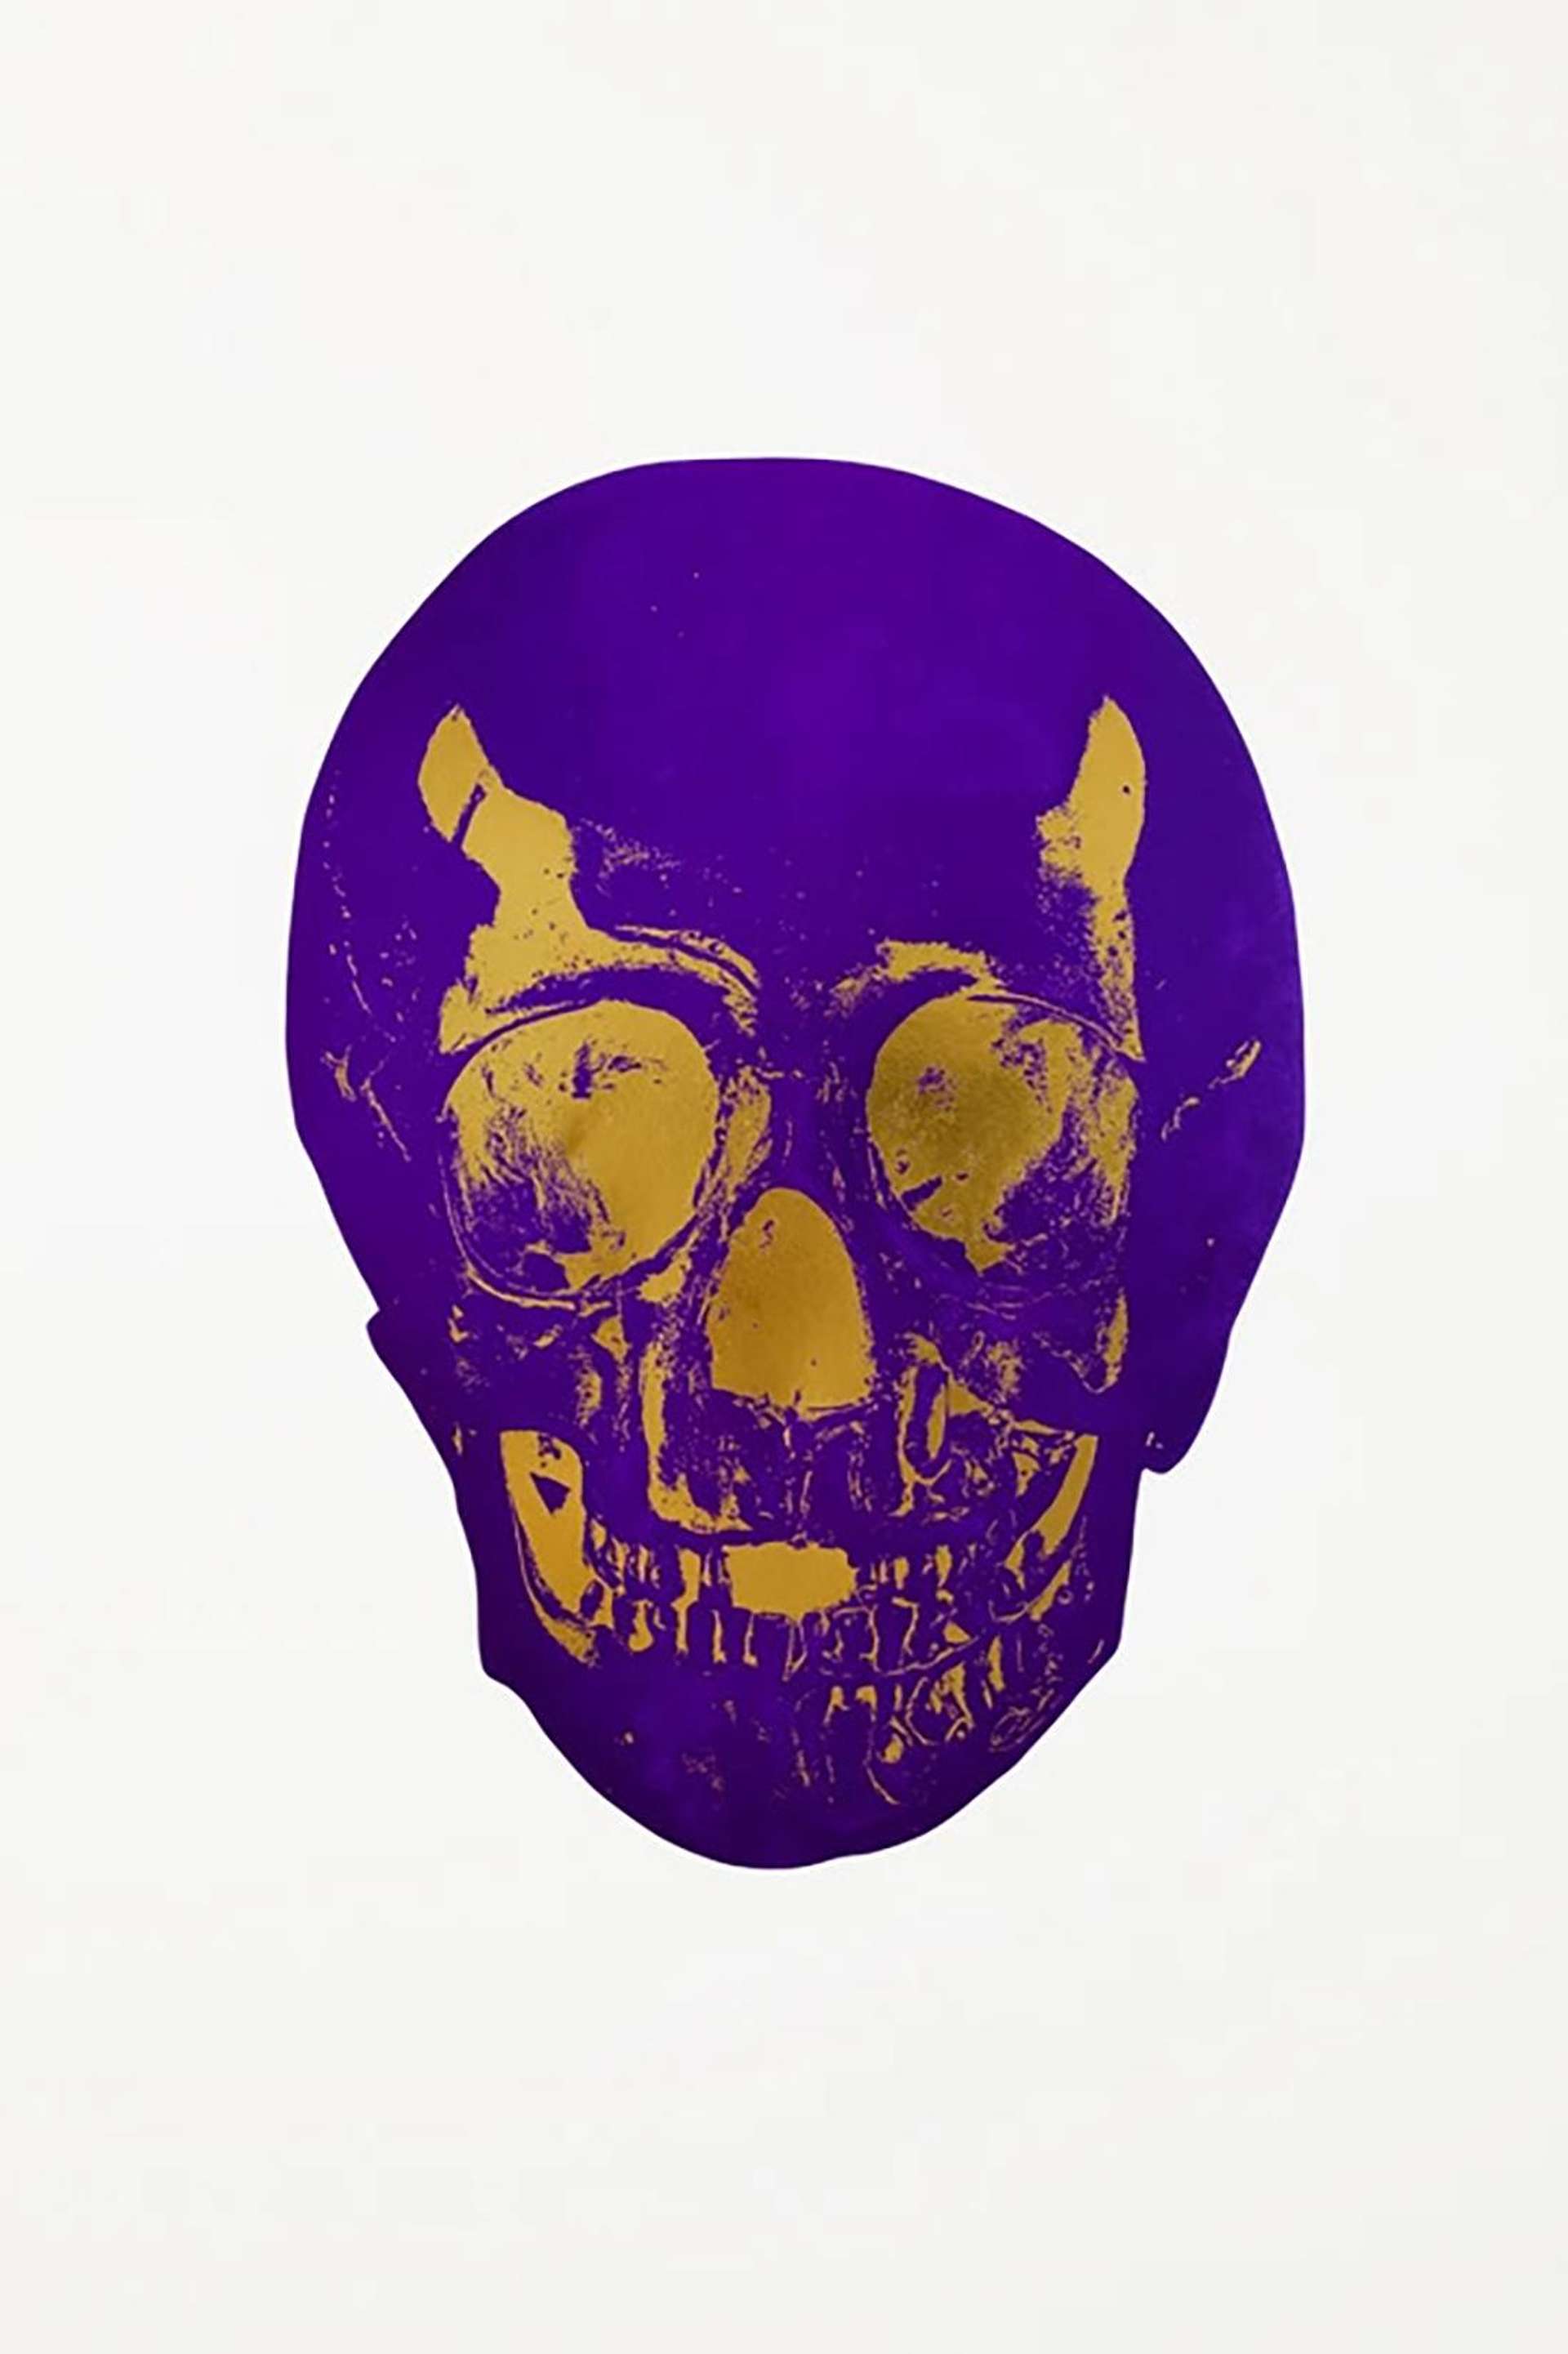 Damien Hirst: The Dead (Imperial purple, oriental gold) - Signed Print